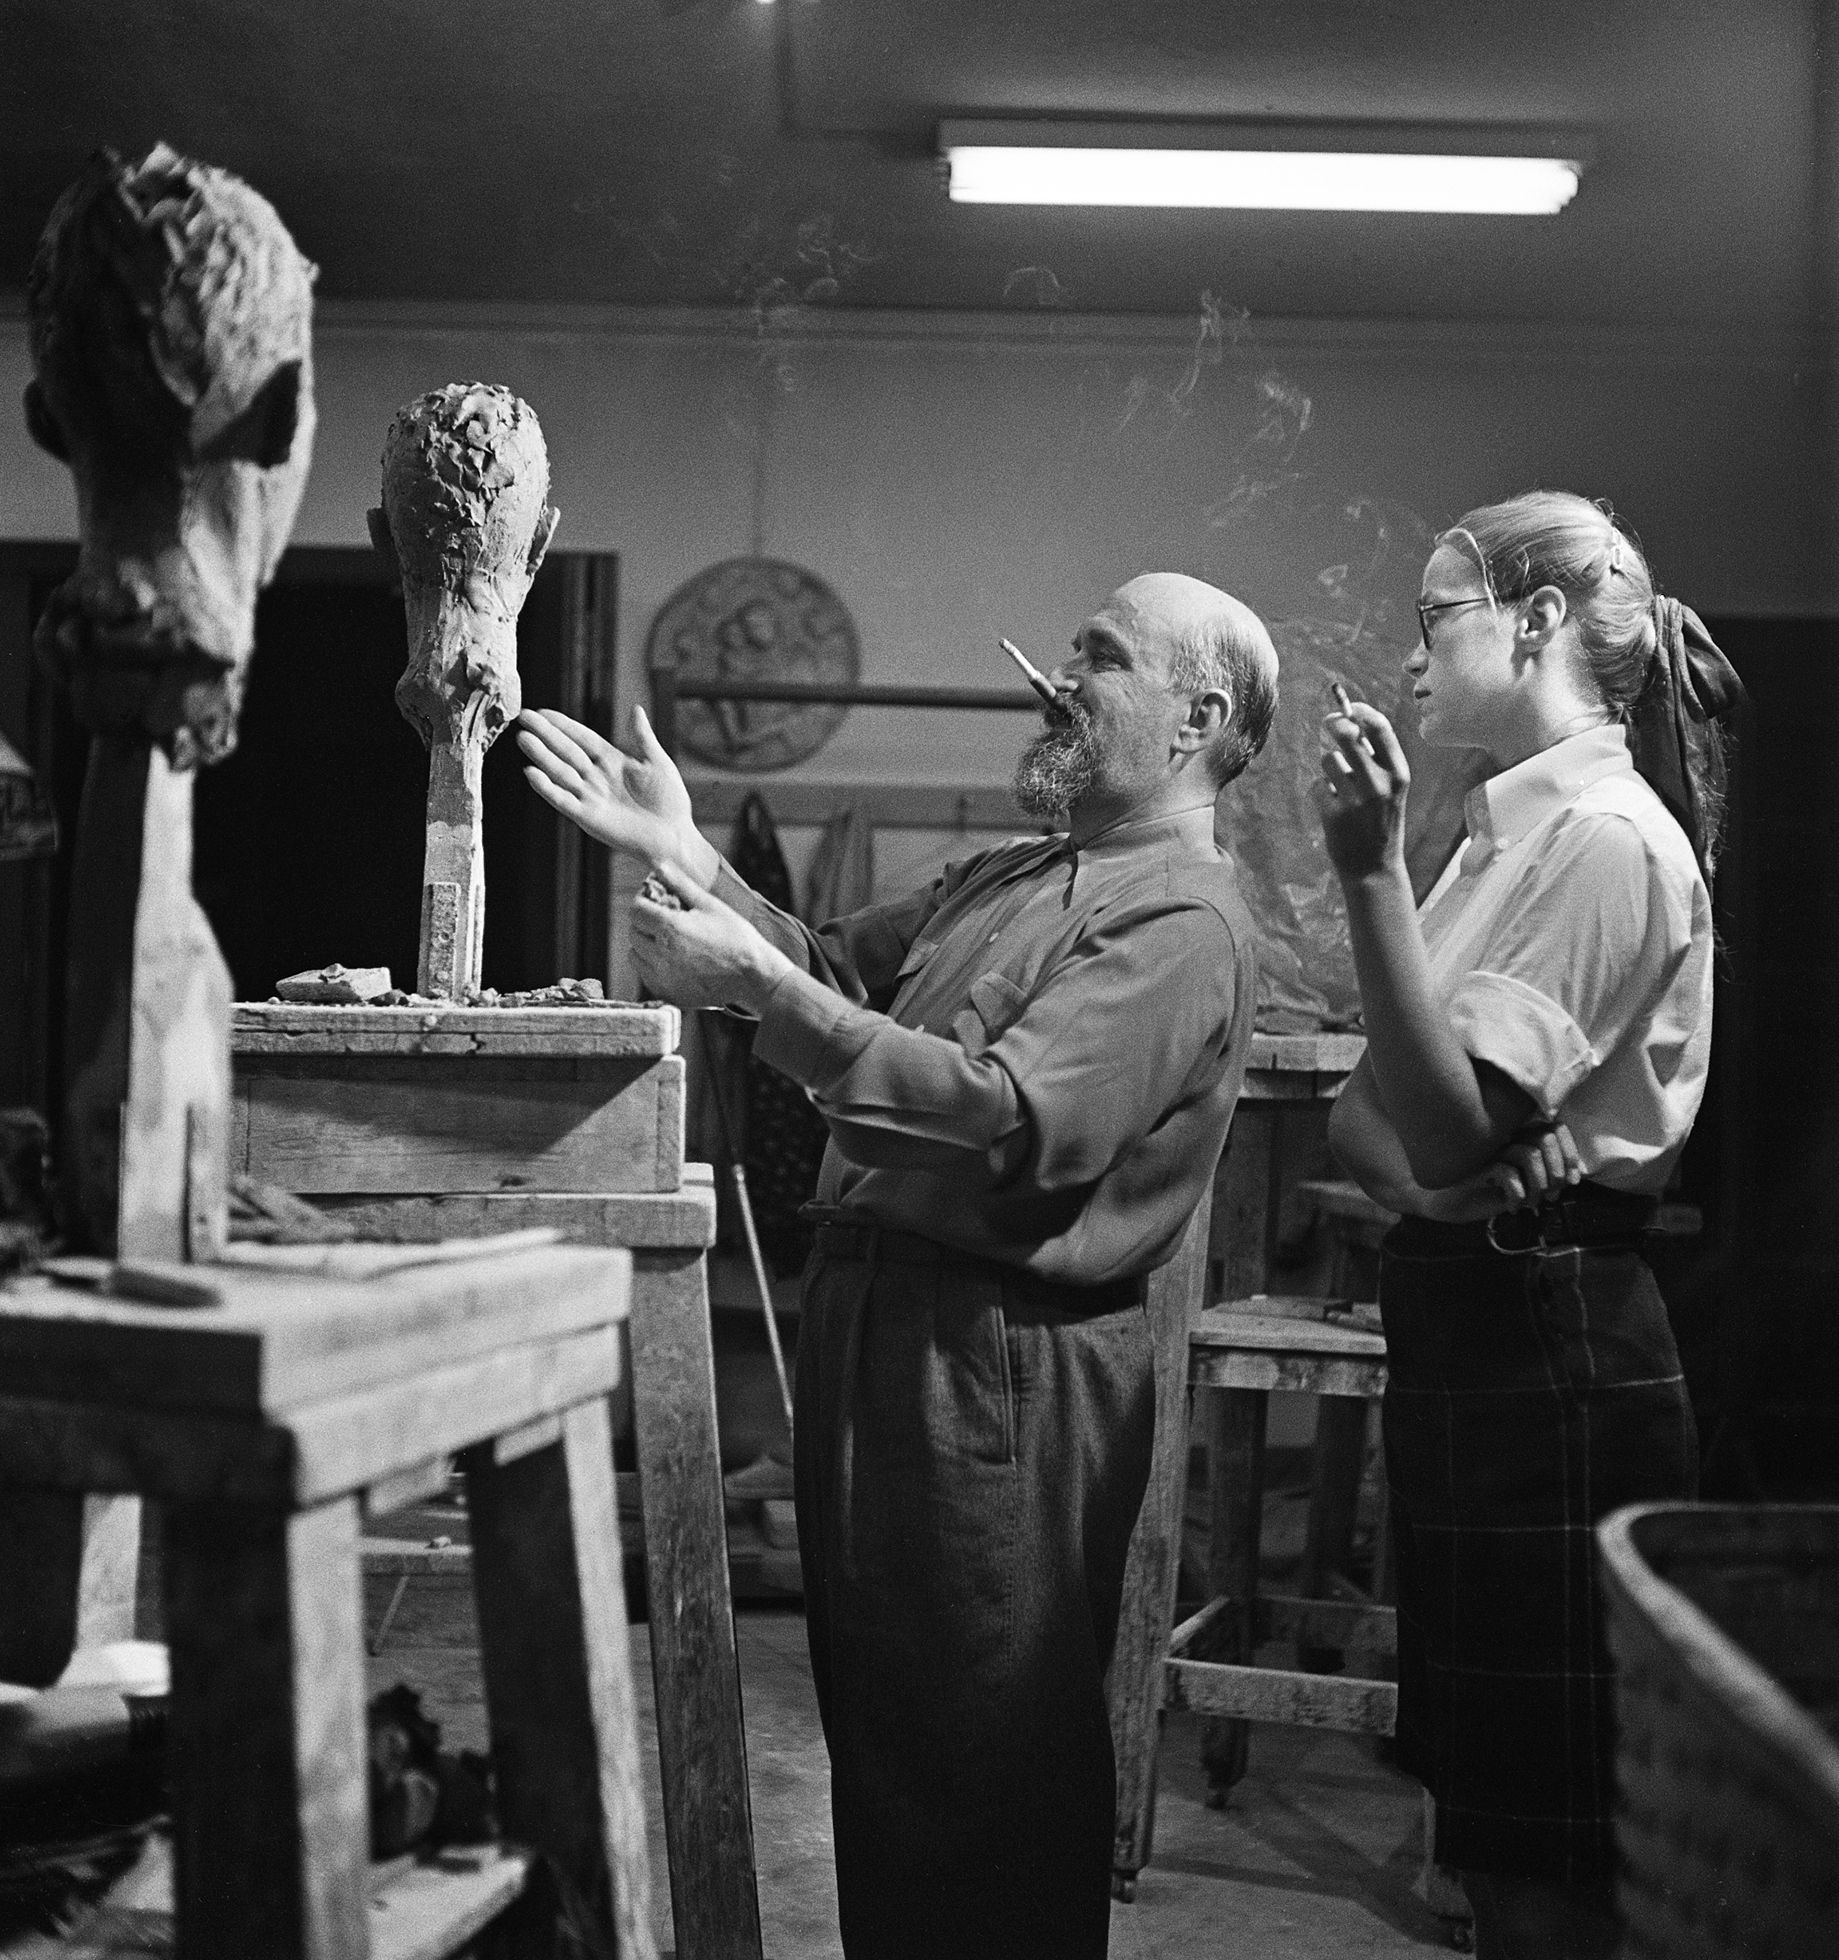 An older man and younger woman stand in an art studio or classroom discussing one of the two clay busts on pedestals. Both people are smoking. The man has a cigarette in his mouth as he gestures to the bust with both hands.